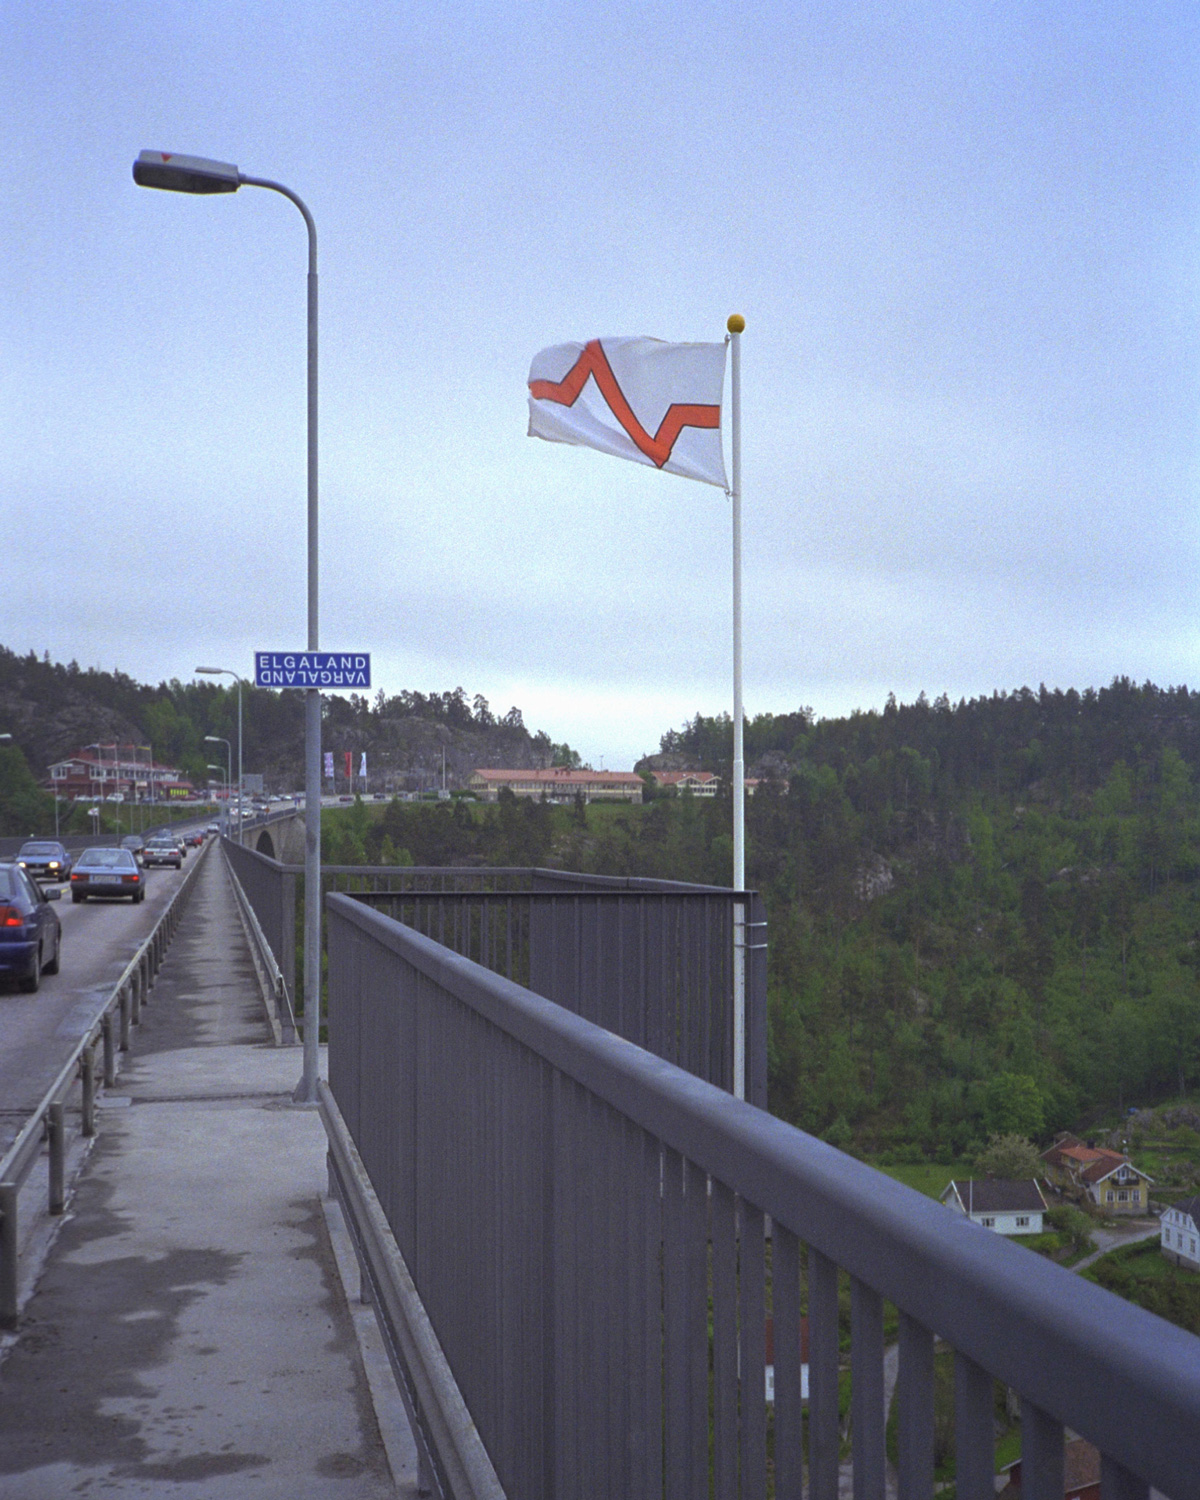 Elgaland-Vargaland physical territory, Svinesund, on the border between Sweden and Norway.